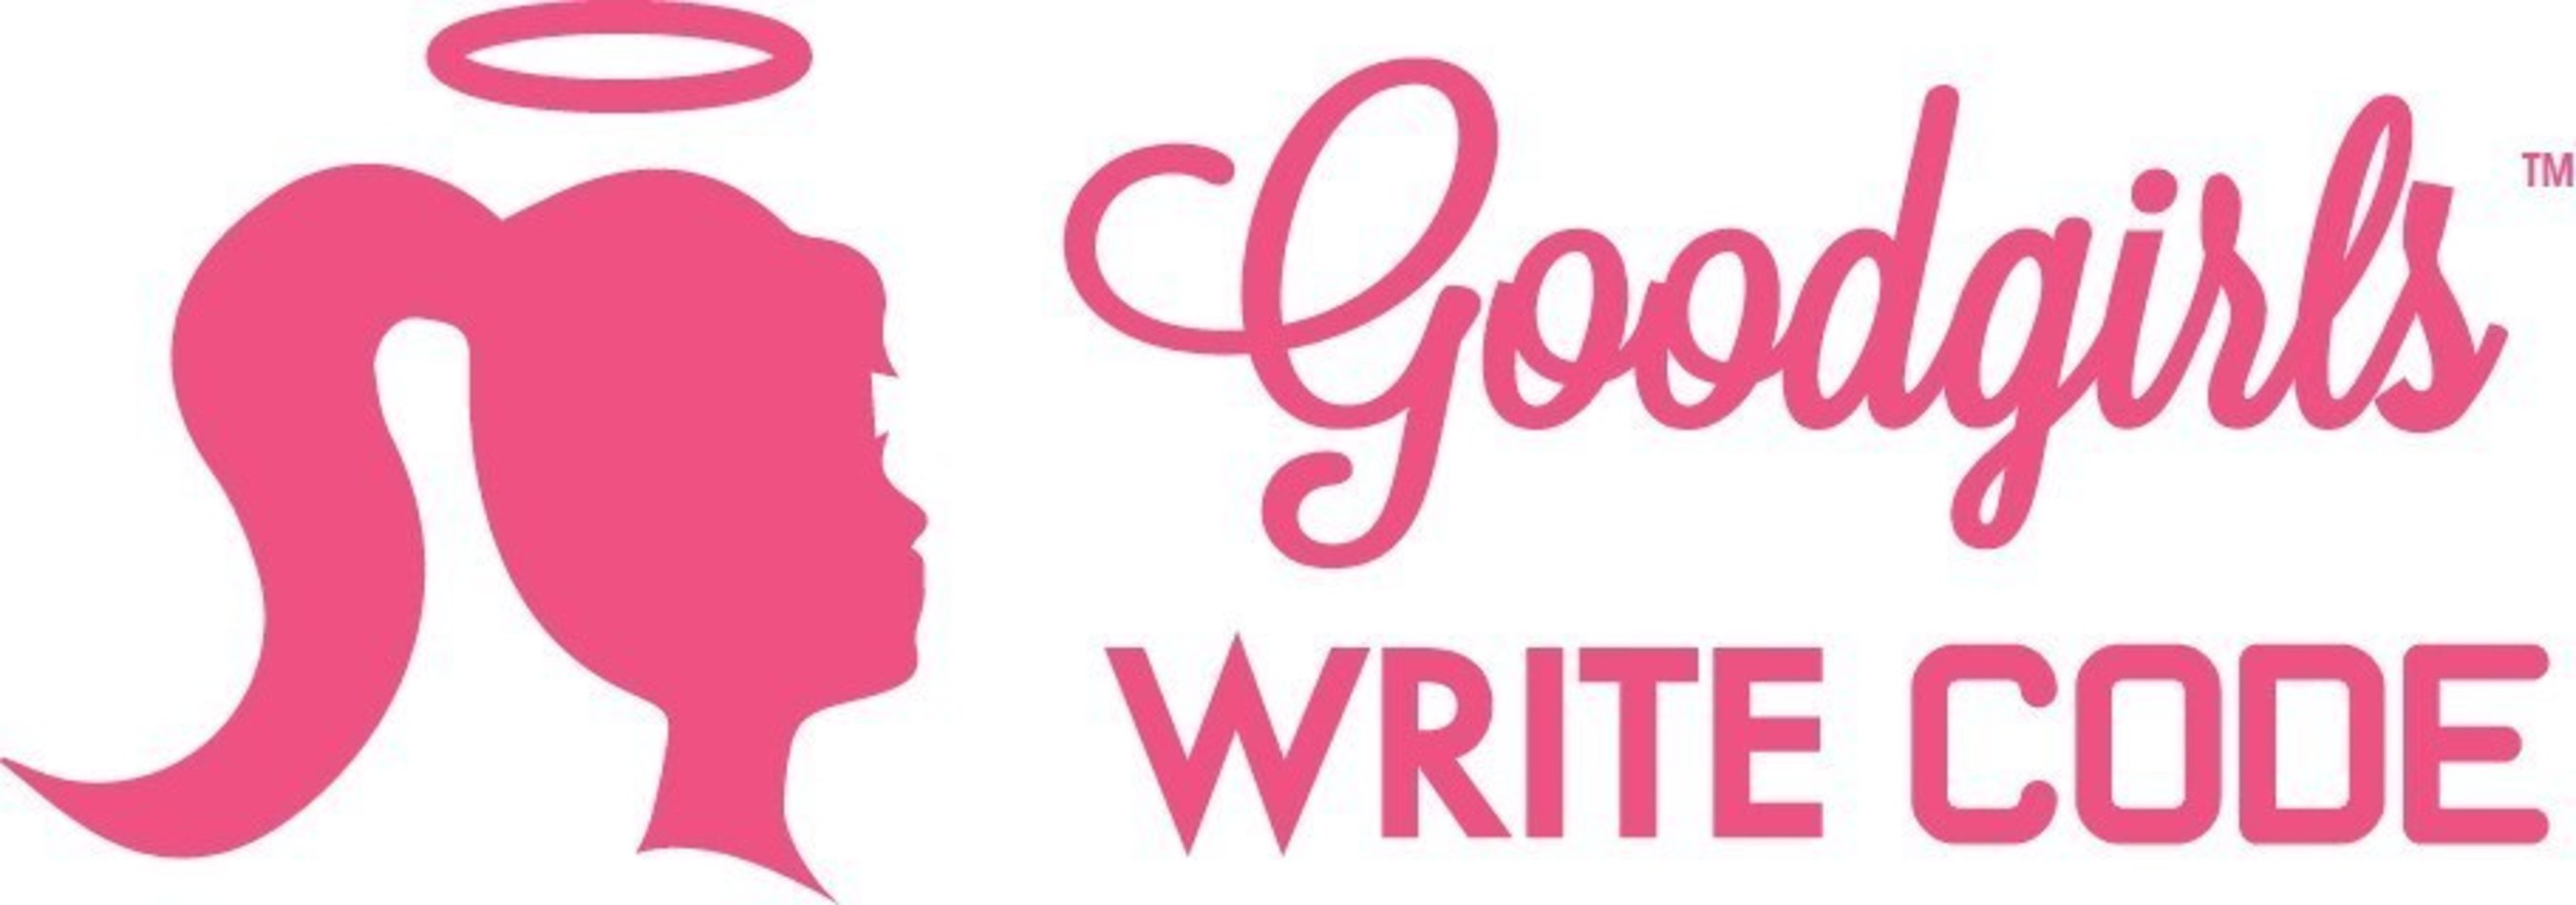 Goodgirls Write Code is a 501(c)(3) non-profit organization dedicated to the empowerment of girls in the fields of science, technology, engineering and math, or STEM. Our interactive programs aim to motivate and educate girls providing them with the skills they need to become the next generation of women-leaders, entrepreneurs and mentors.